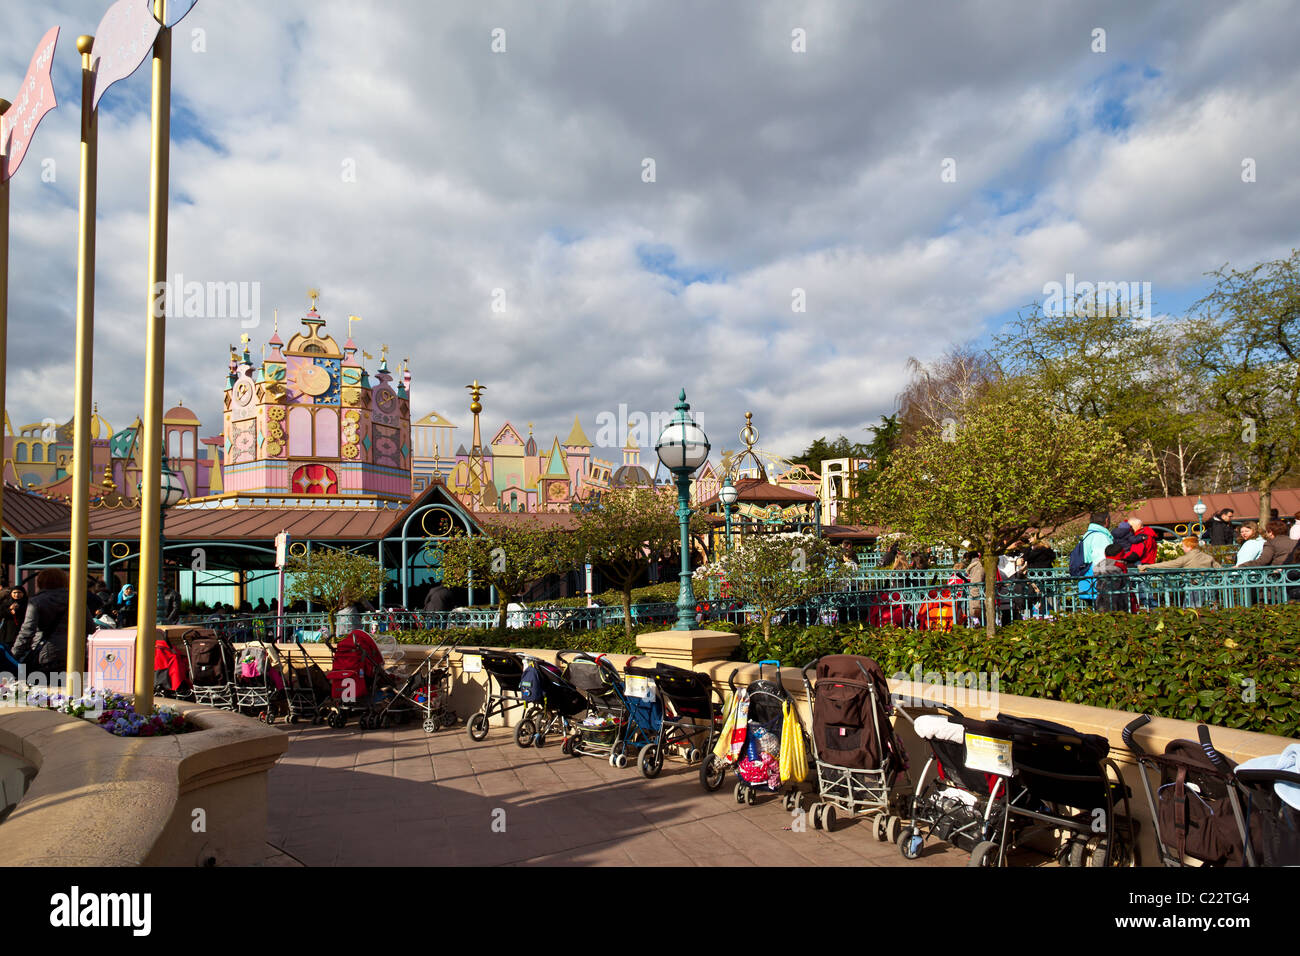 A line of strollers / baby prams outside a ride at Euro Disneyland Paris France. Charles Lupica Stock Photo